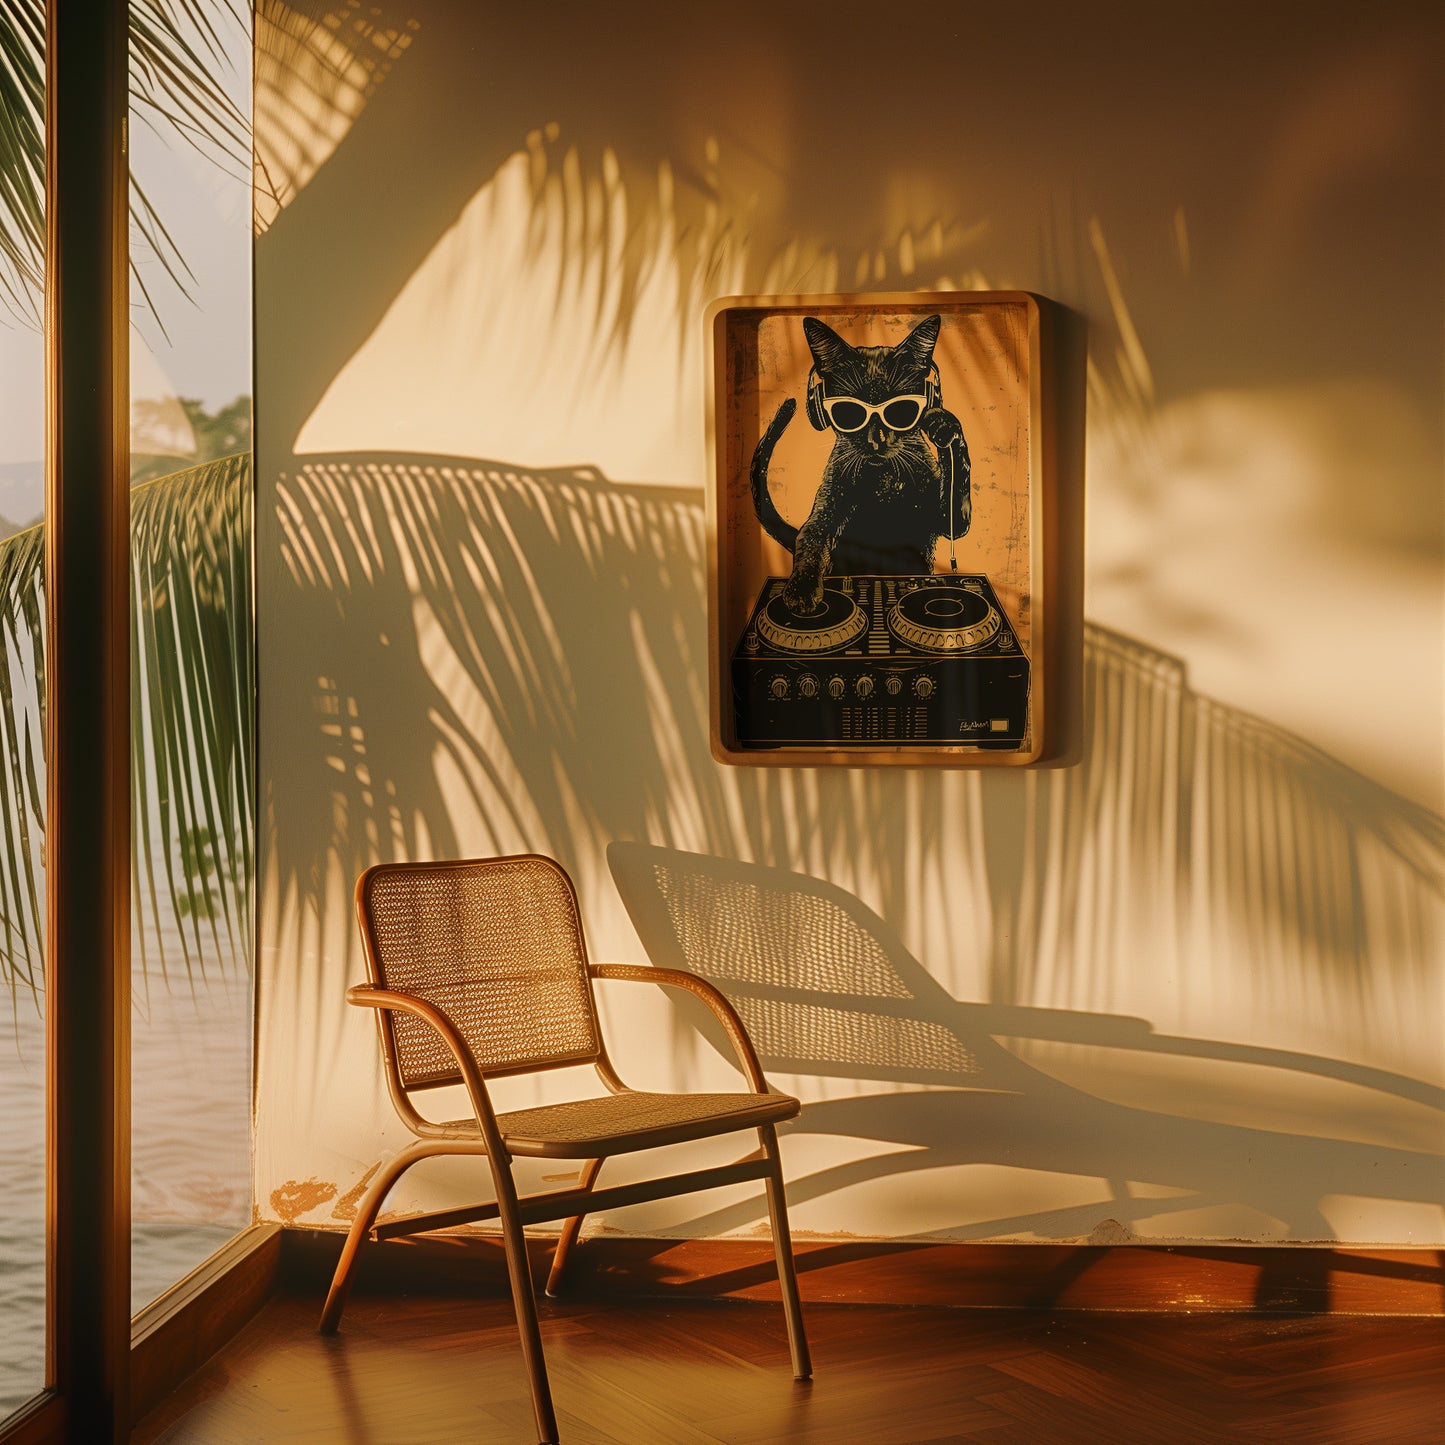 A cozy corner with a wicker chair, shadowed palm leaves, and vintage cat art on the wall.